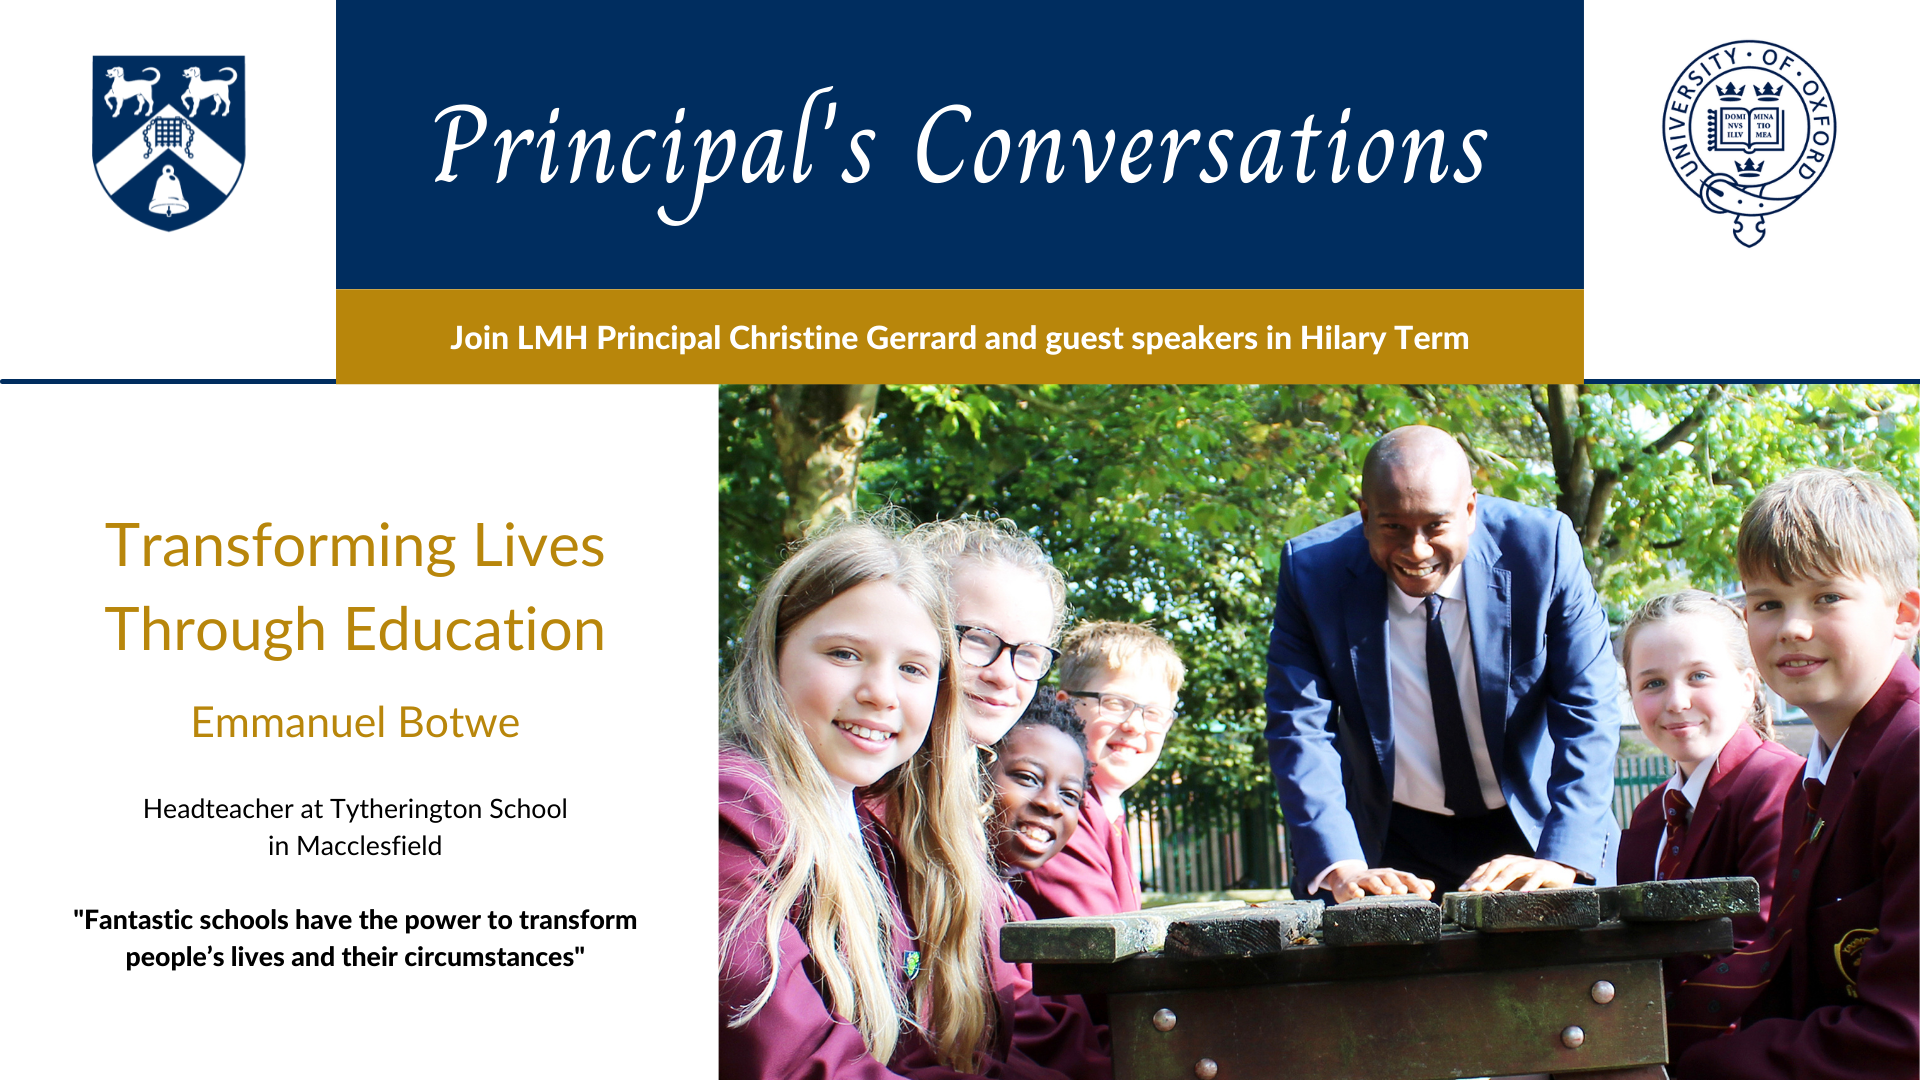 Poster for Principal's Conversation with Emmanuel Botwe